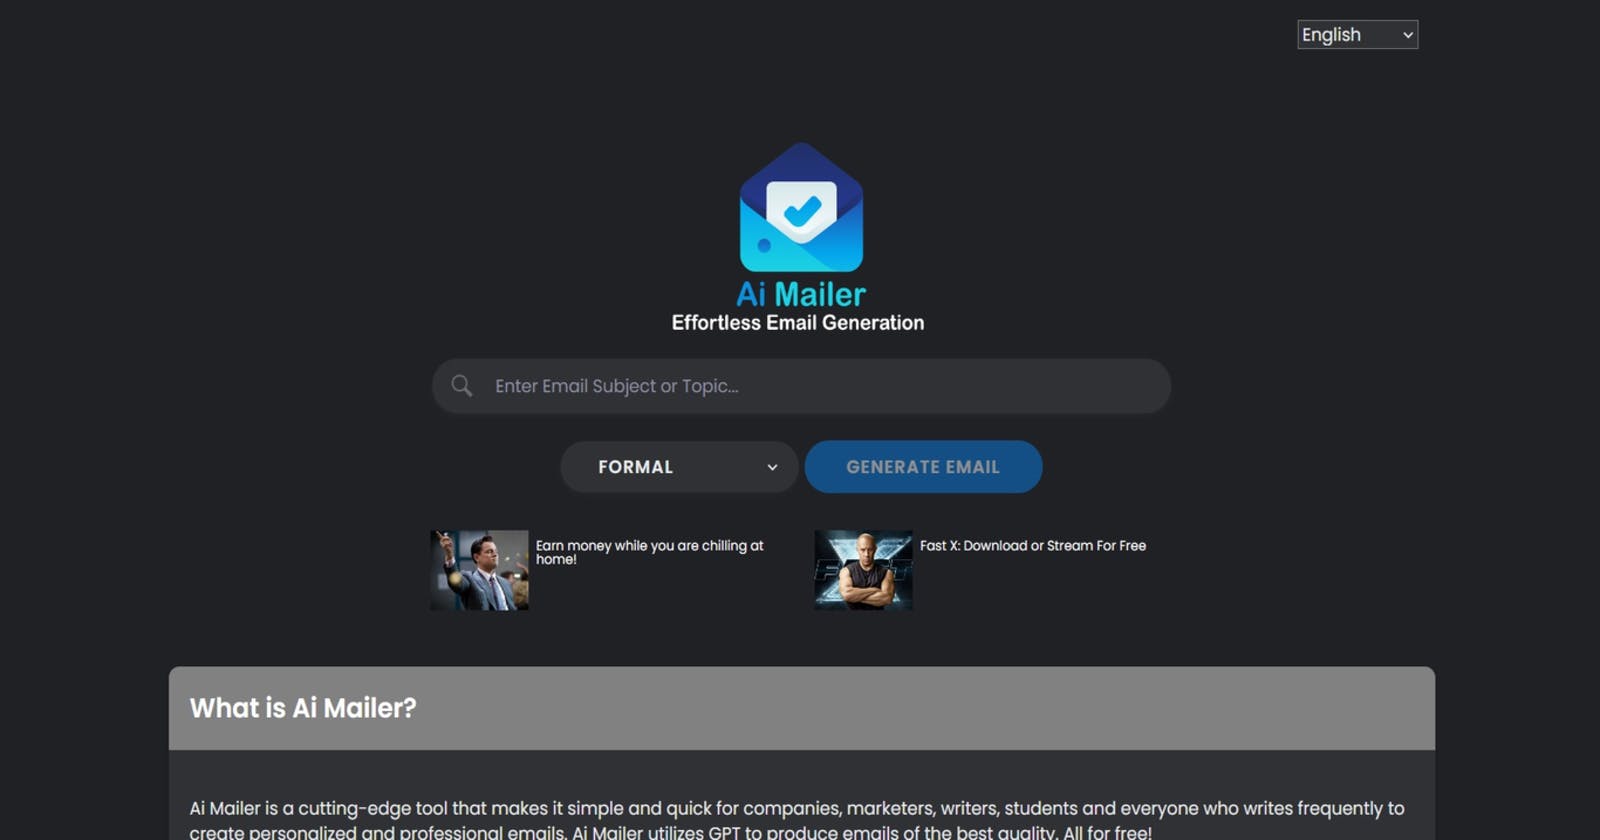 AI Mailer - Effortless Email Generation